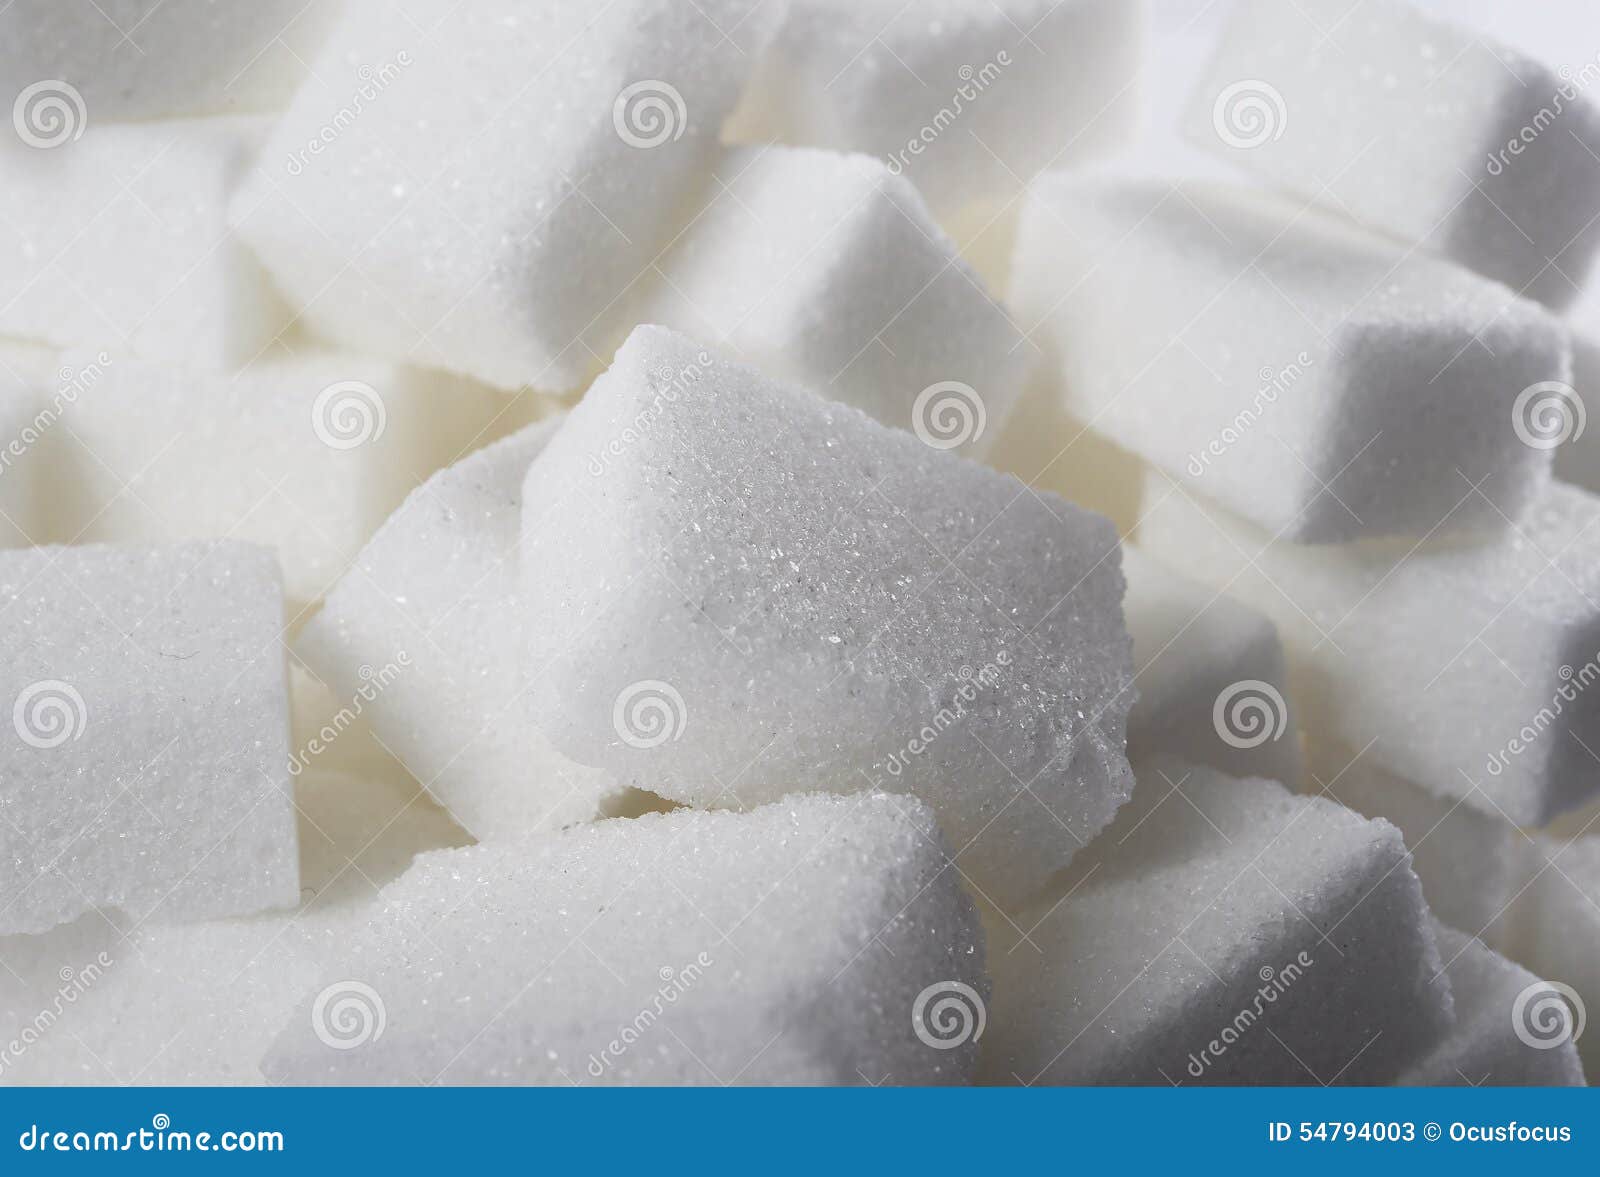 Isolated Pile of Sugar Cubes Close Up View in Sweet Nutrition and Diet ...